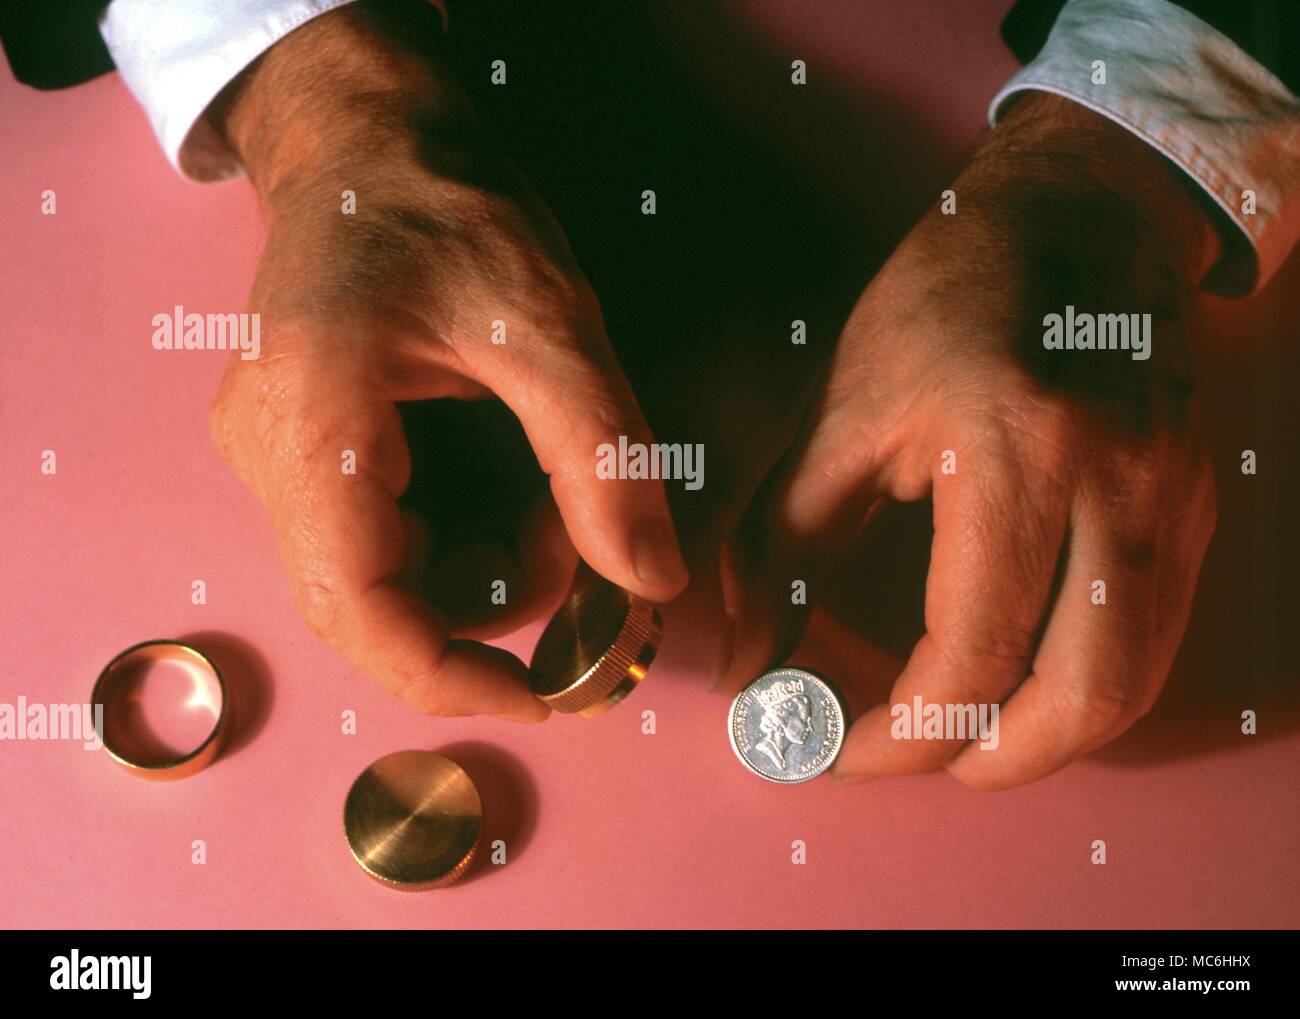 Magicians Hands performing coin tricks. Sleight of hand. Stock Photo